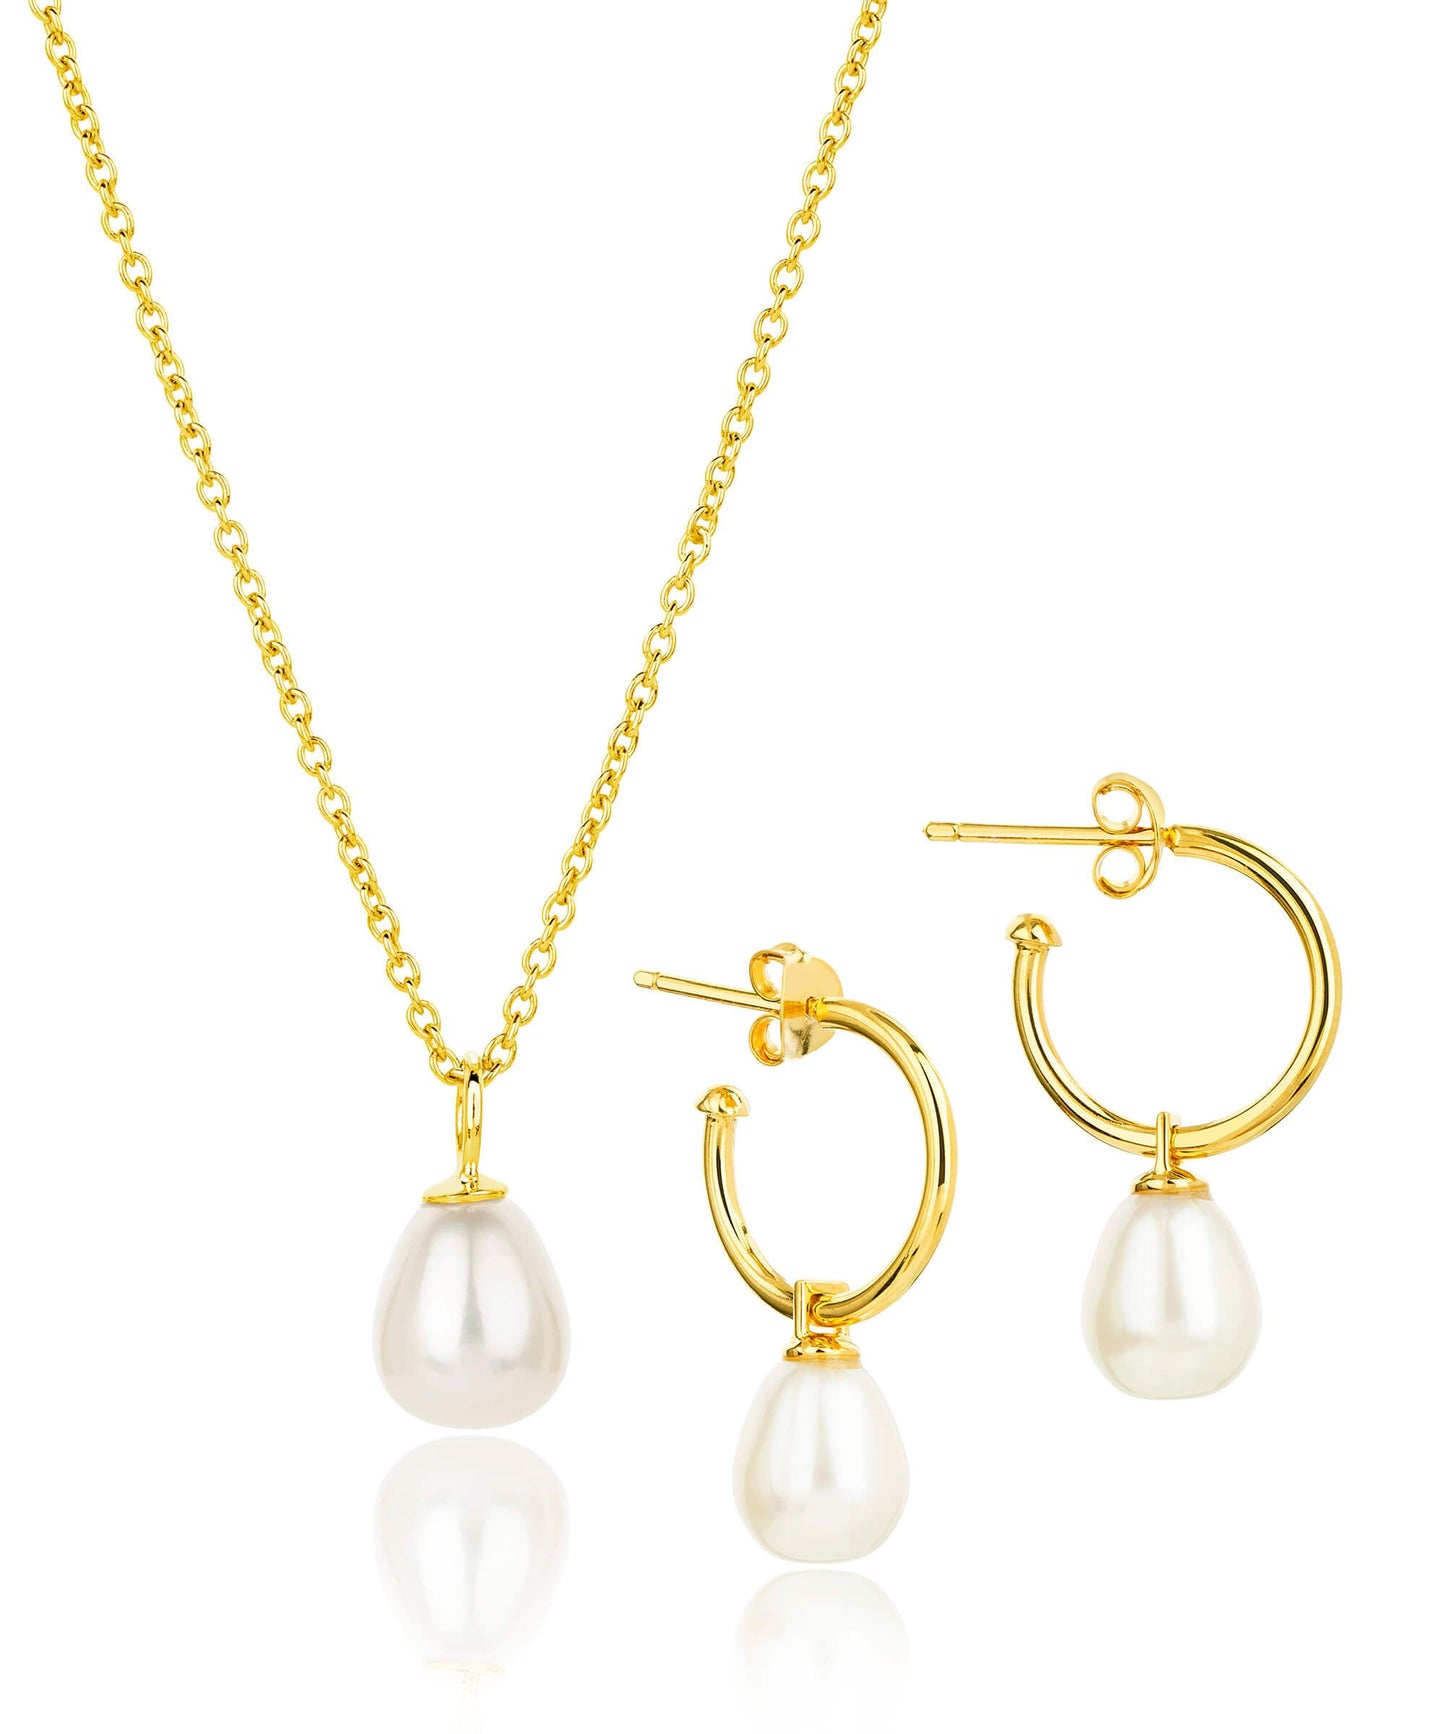 Every day gold and pearl jewellery set